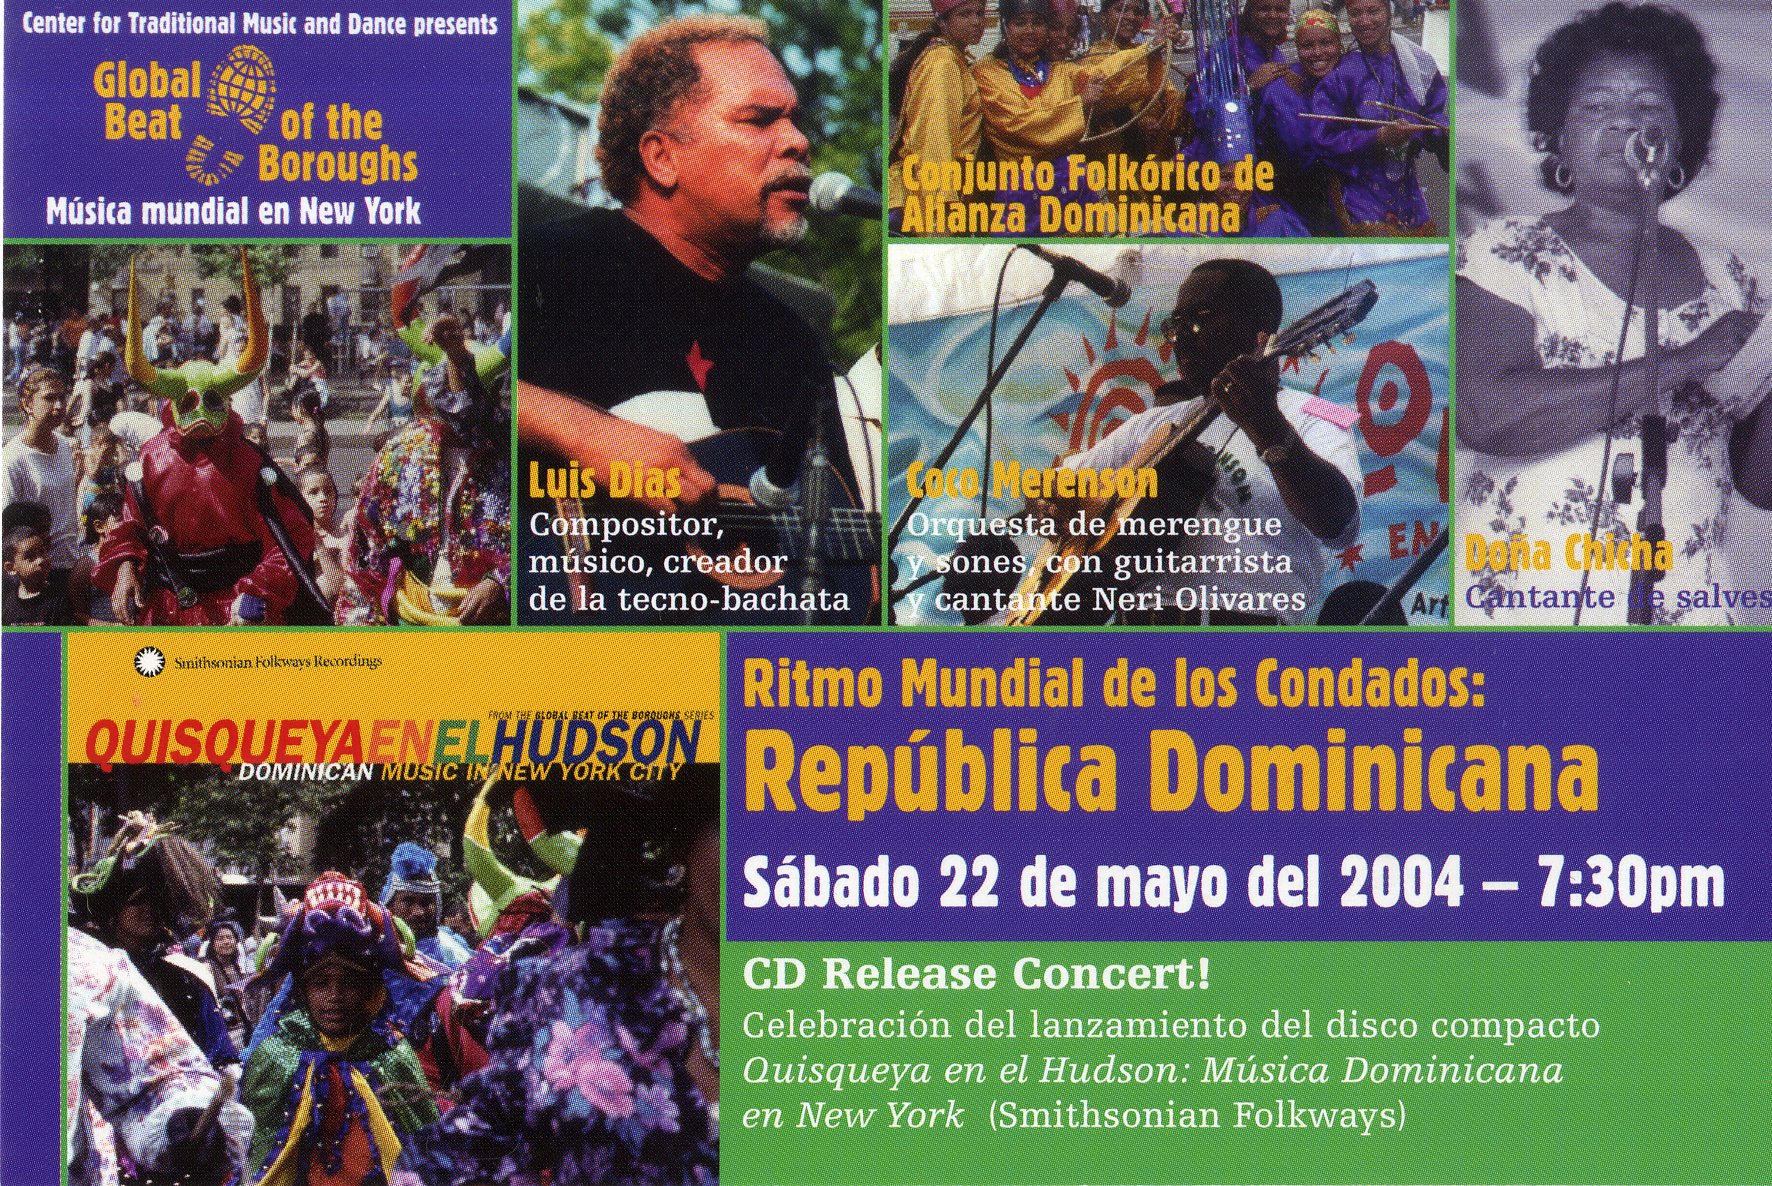 Event flyer, Quisqueya on the Hudson CD release concert featuring Doña Chicha, Luis Dias, and Coco Merenson, May 22, 2004